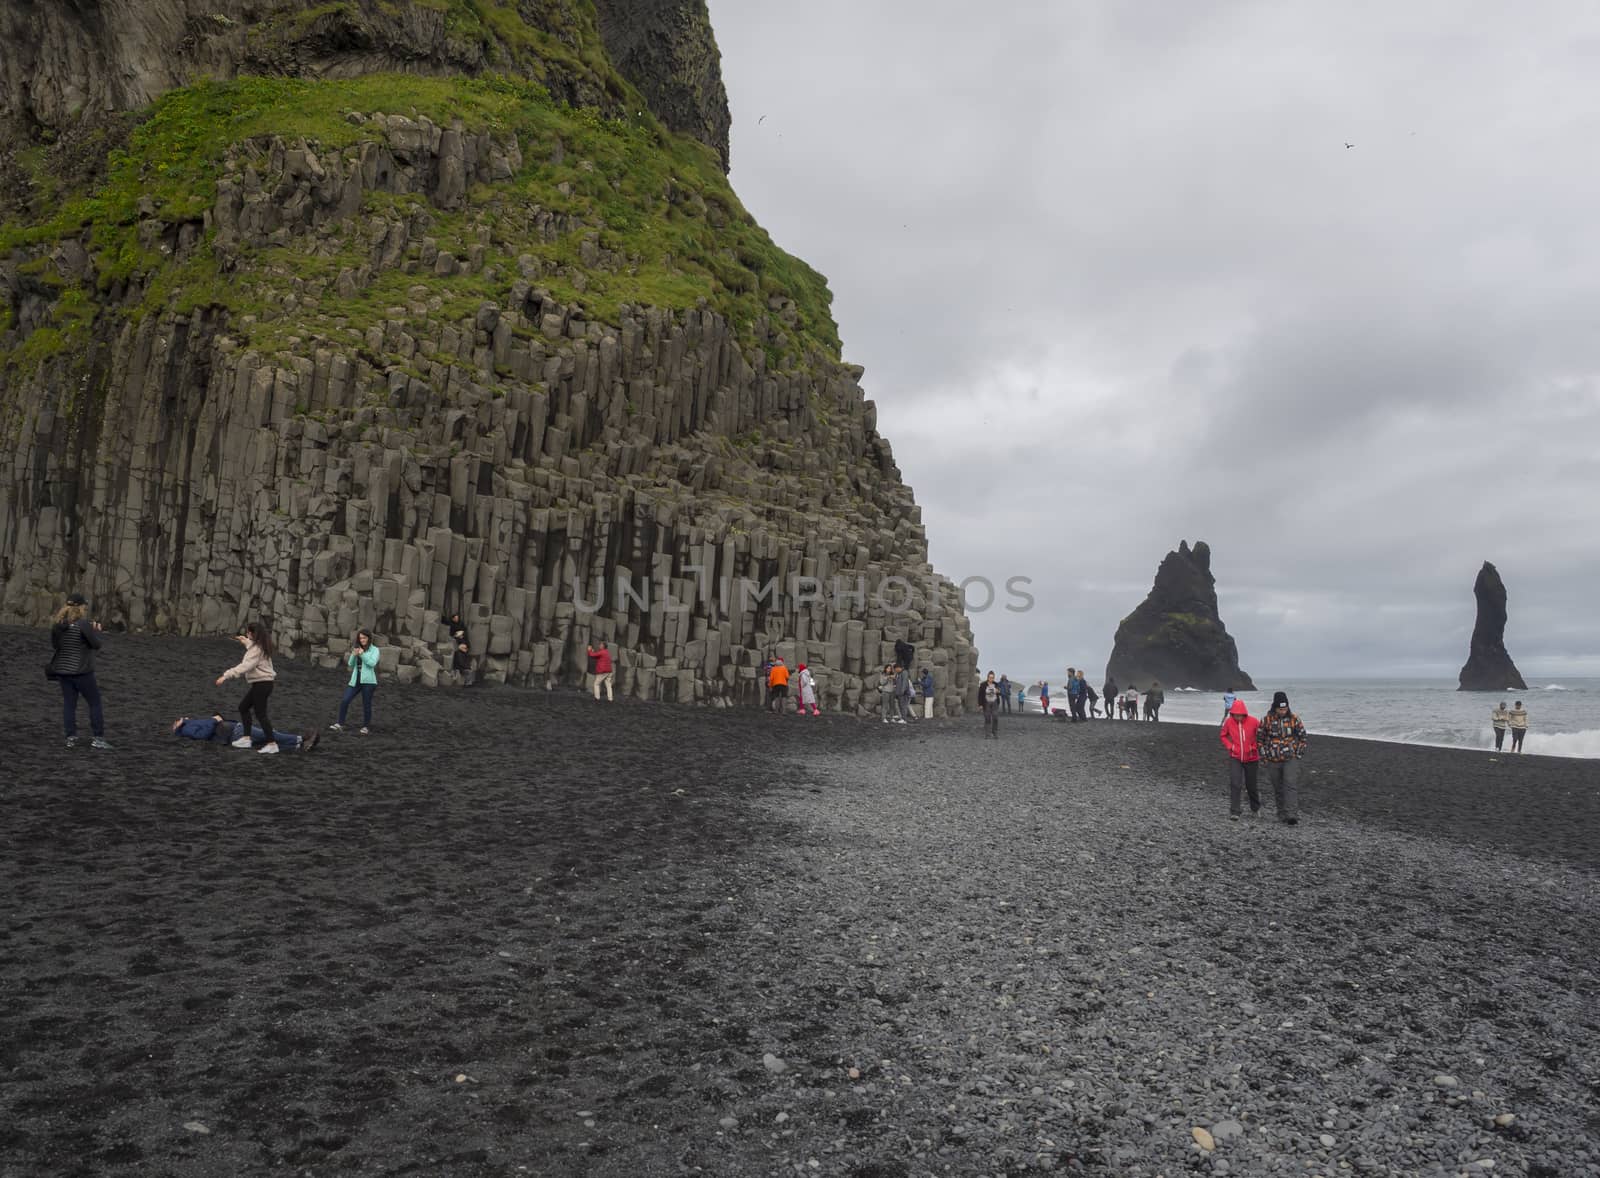 South Iceland, Vik i Myrdal, July 4, 2018: Group of colorful dressed tourist people takeing pictures and havenig fun at Basalt rock columns and Troll toes on black sand beach reynisfjara, fog and moody sky, monochromatic look